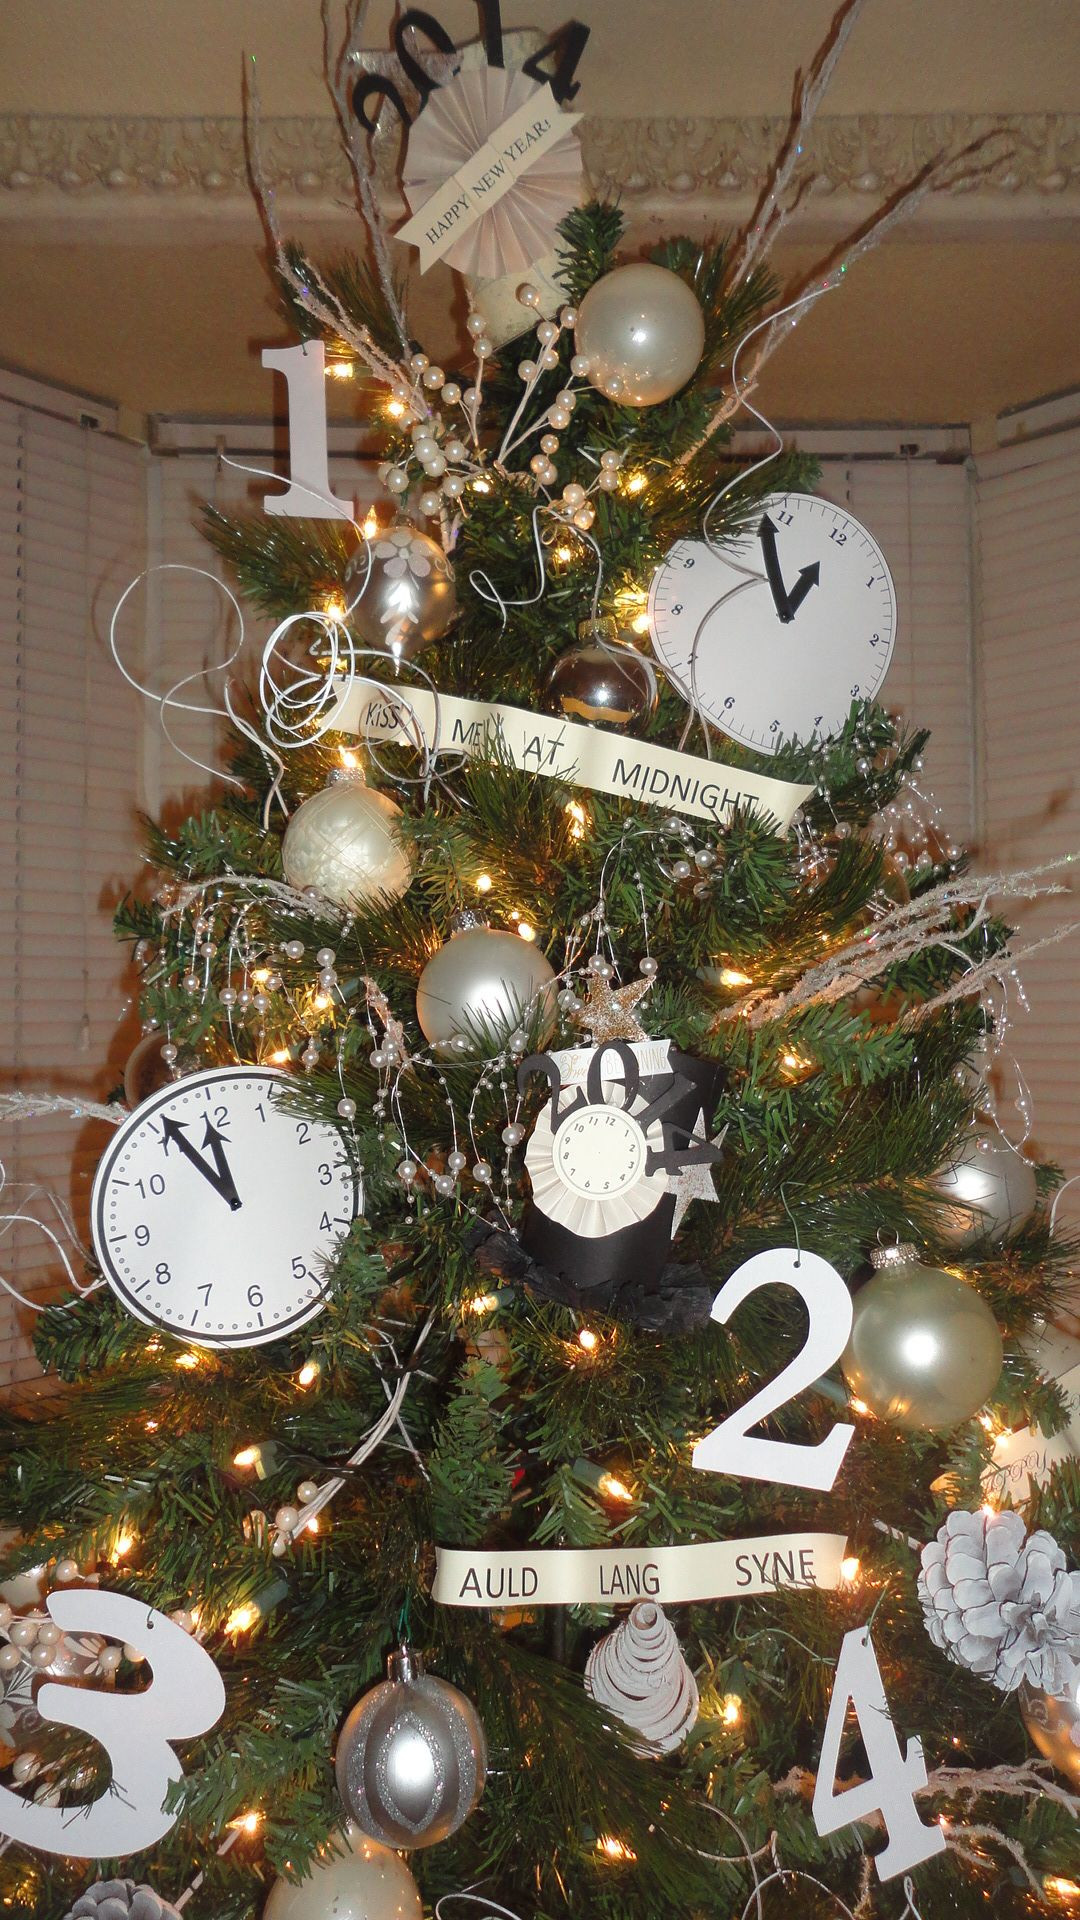 Christmas Eve Party Ideas For Family
 After Christmas I turned my tree into a New Years Eve tree